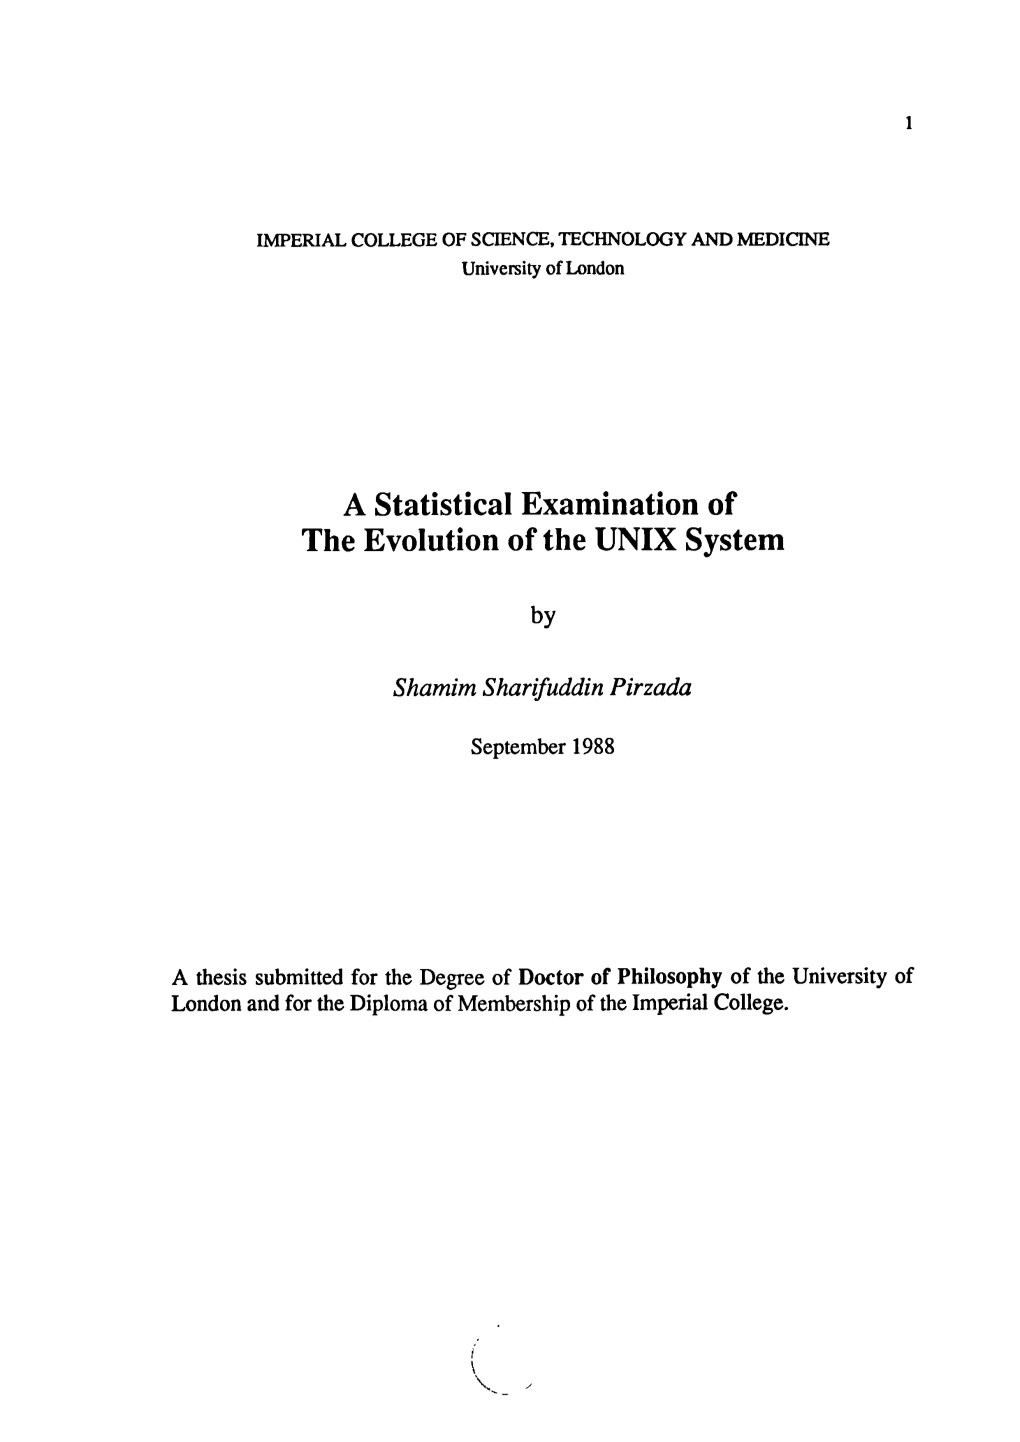 A Statistical Examination of the Evolution of the UNIX System